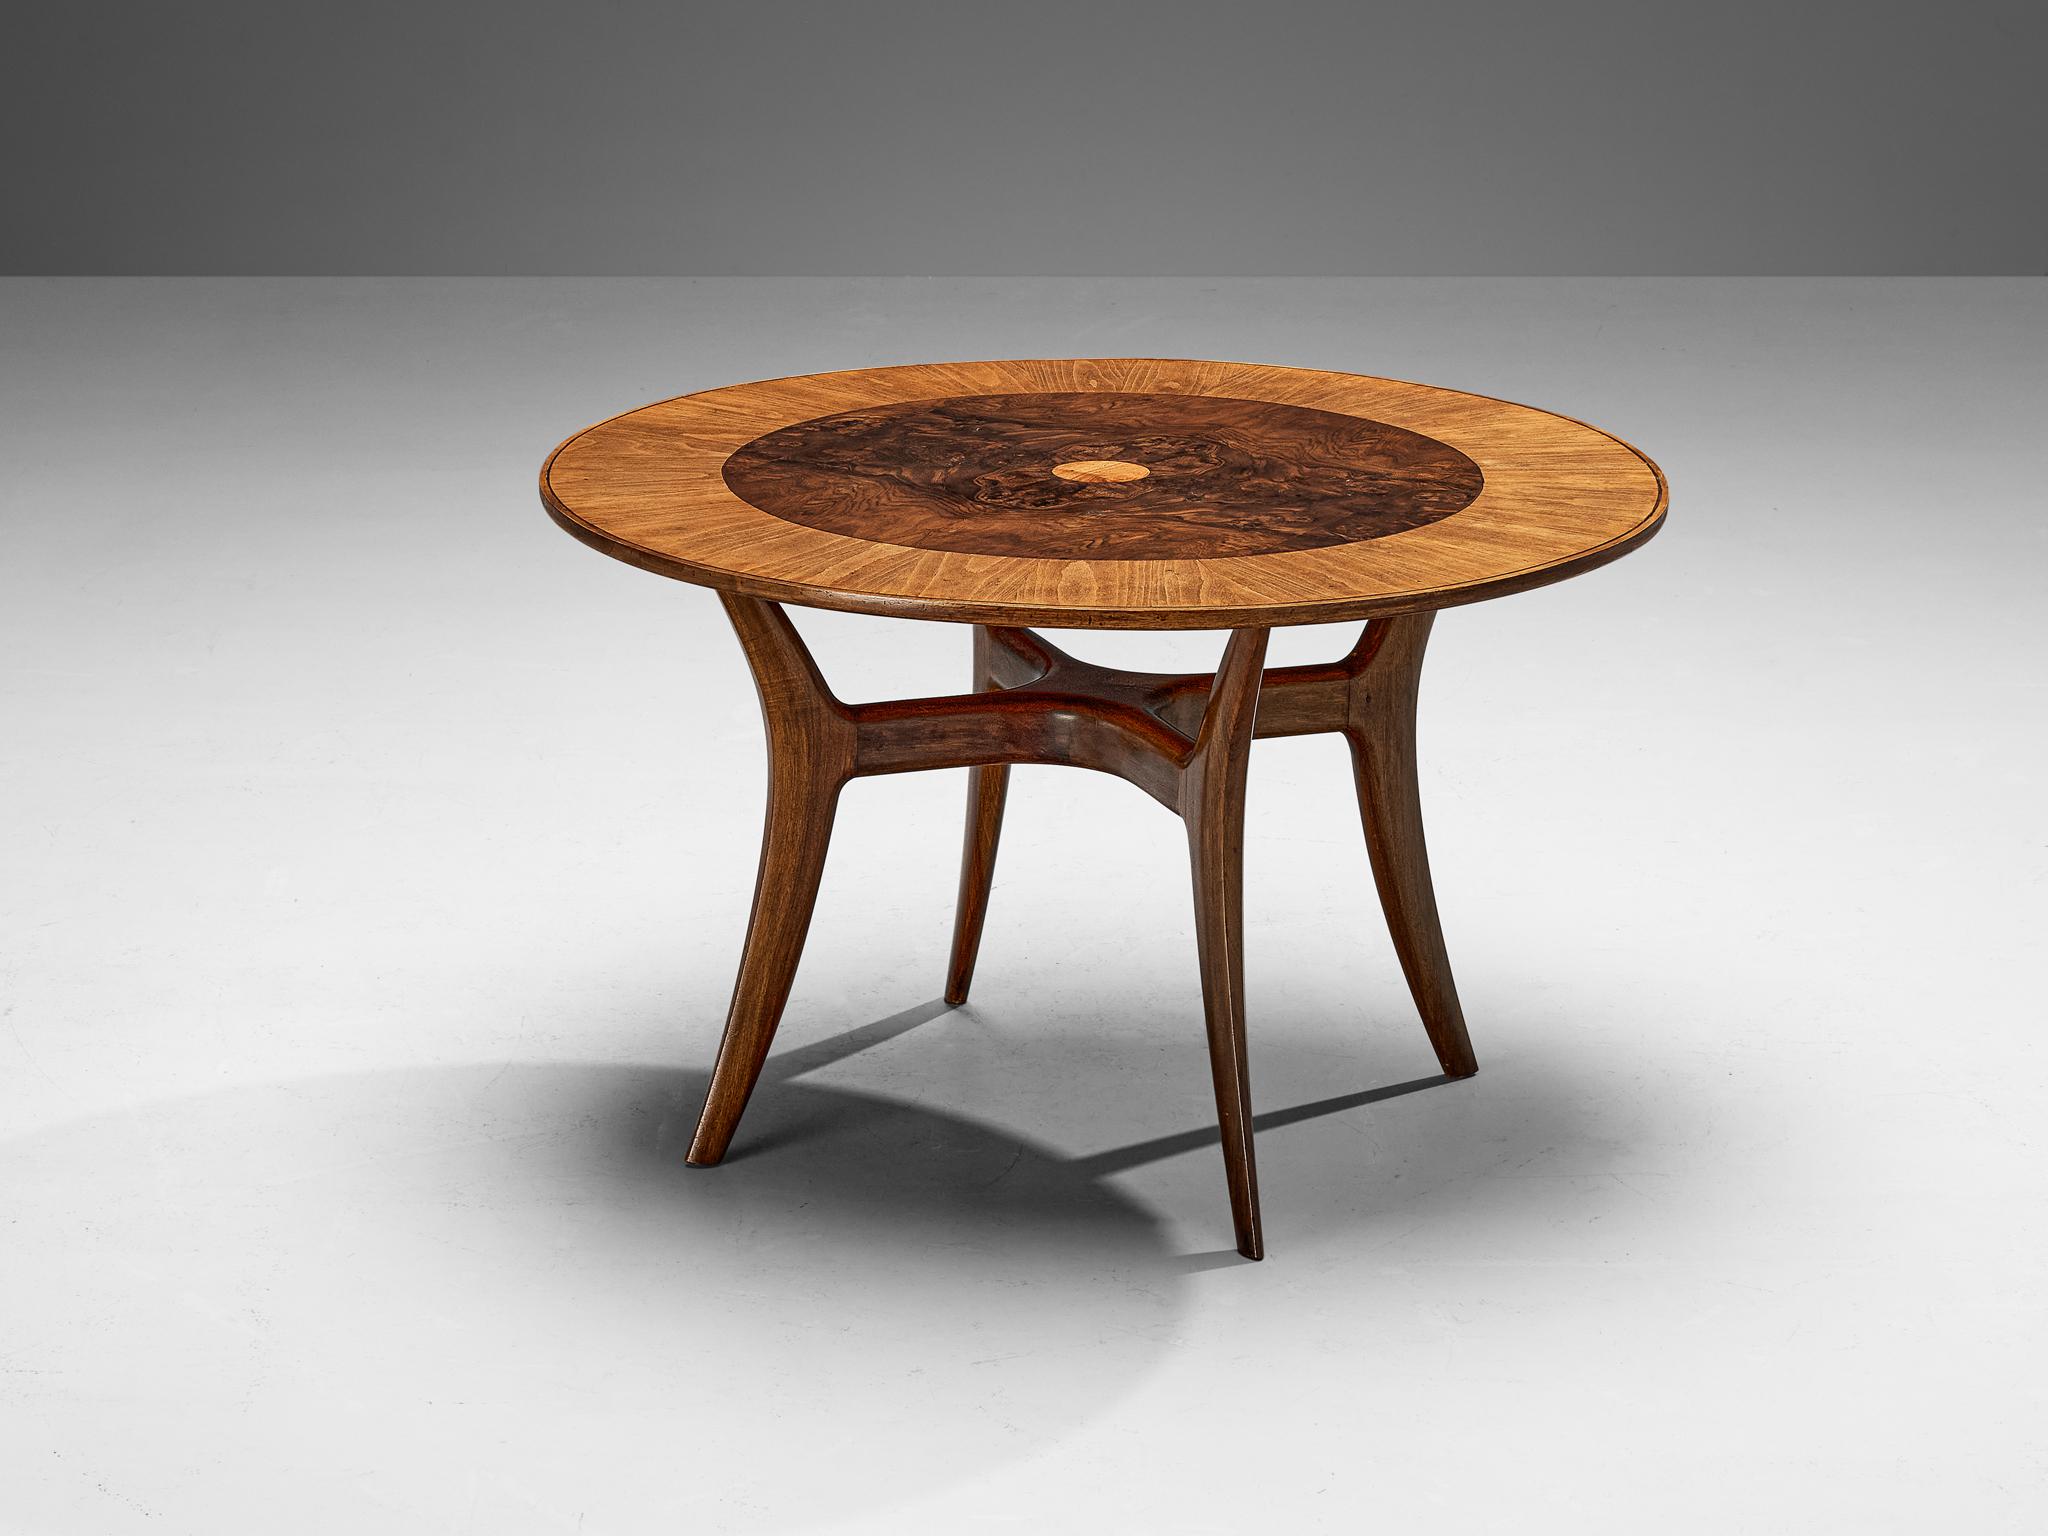 Dining or center table, briar, walnut, Italy, circa 1955

Stunningly elegant dining or center table made in Italy around 1955. This circular table shows an incredibly rich choice of materials, that elevate this design to great heights. The round top